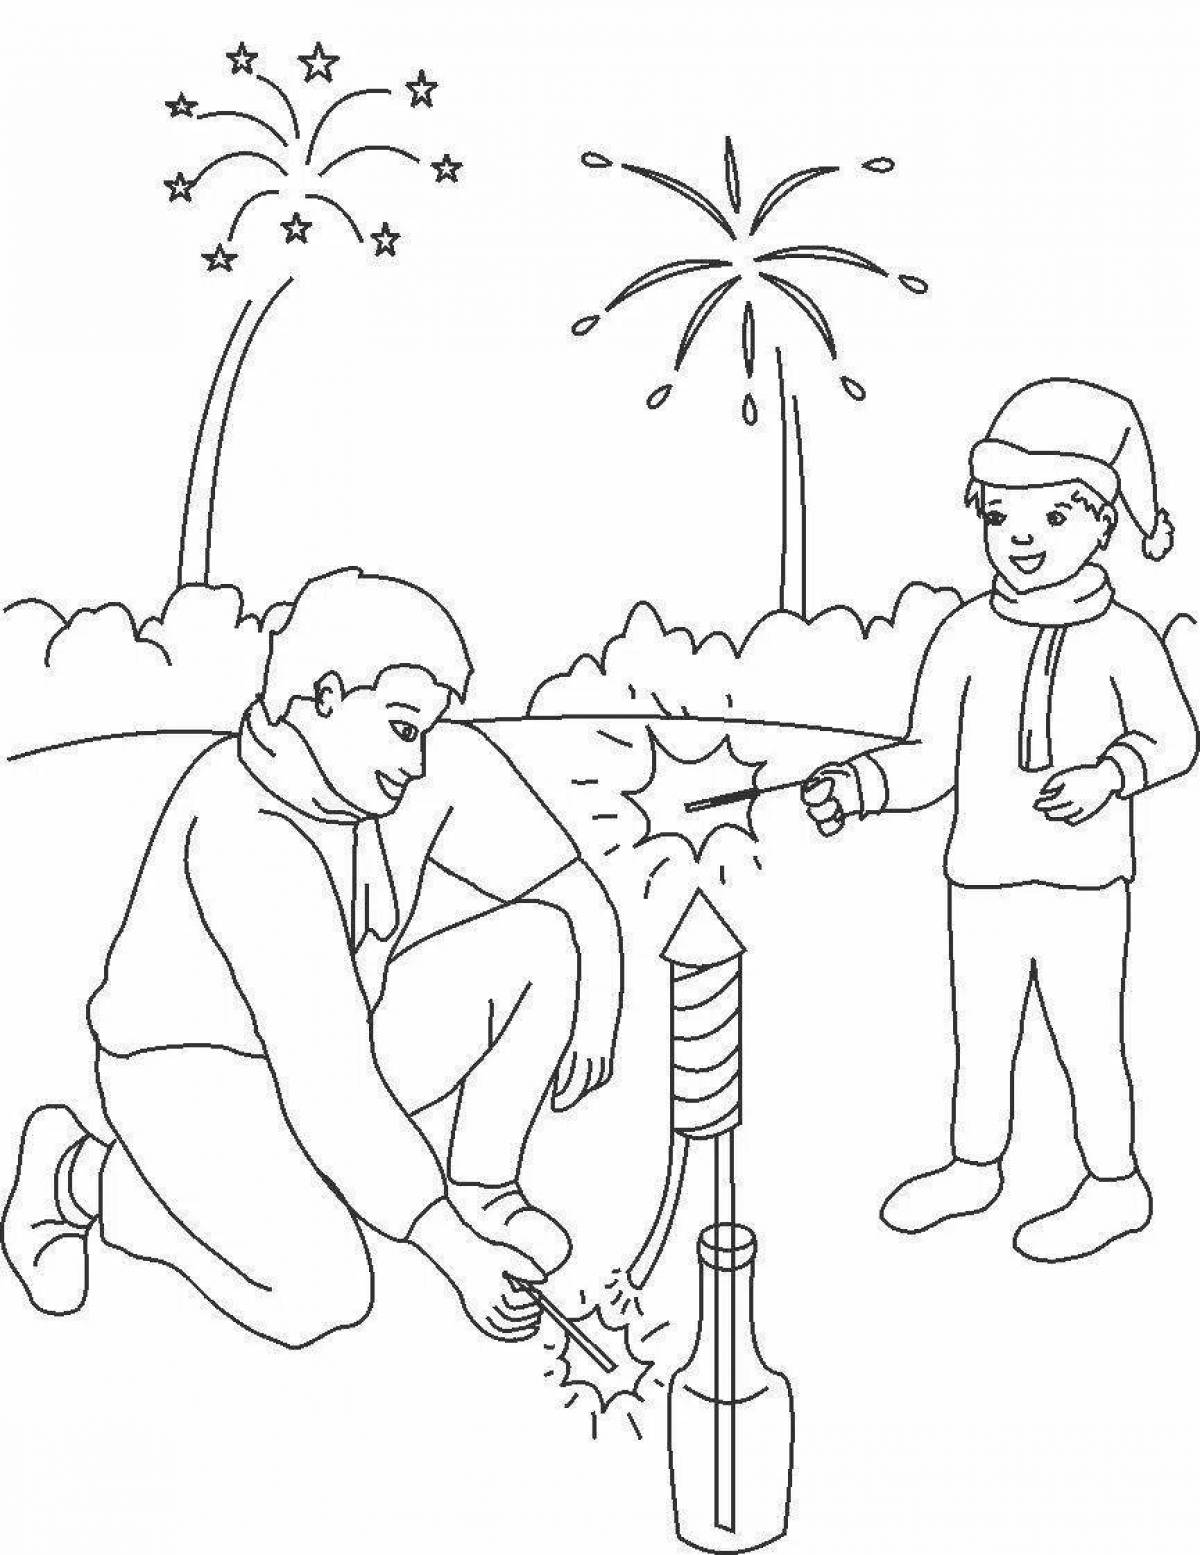 Live safe Christmas coloring book